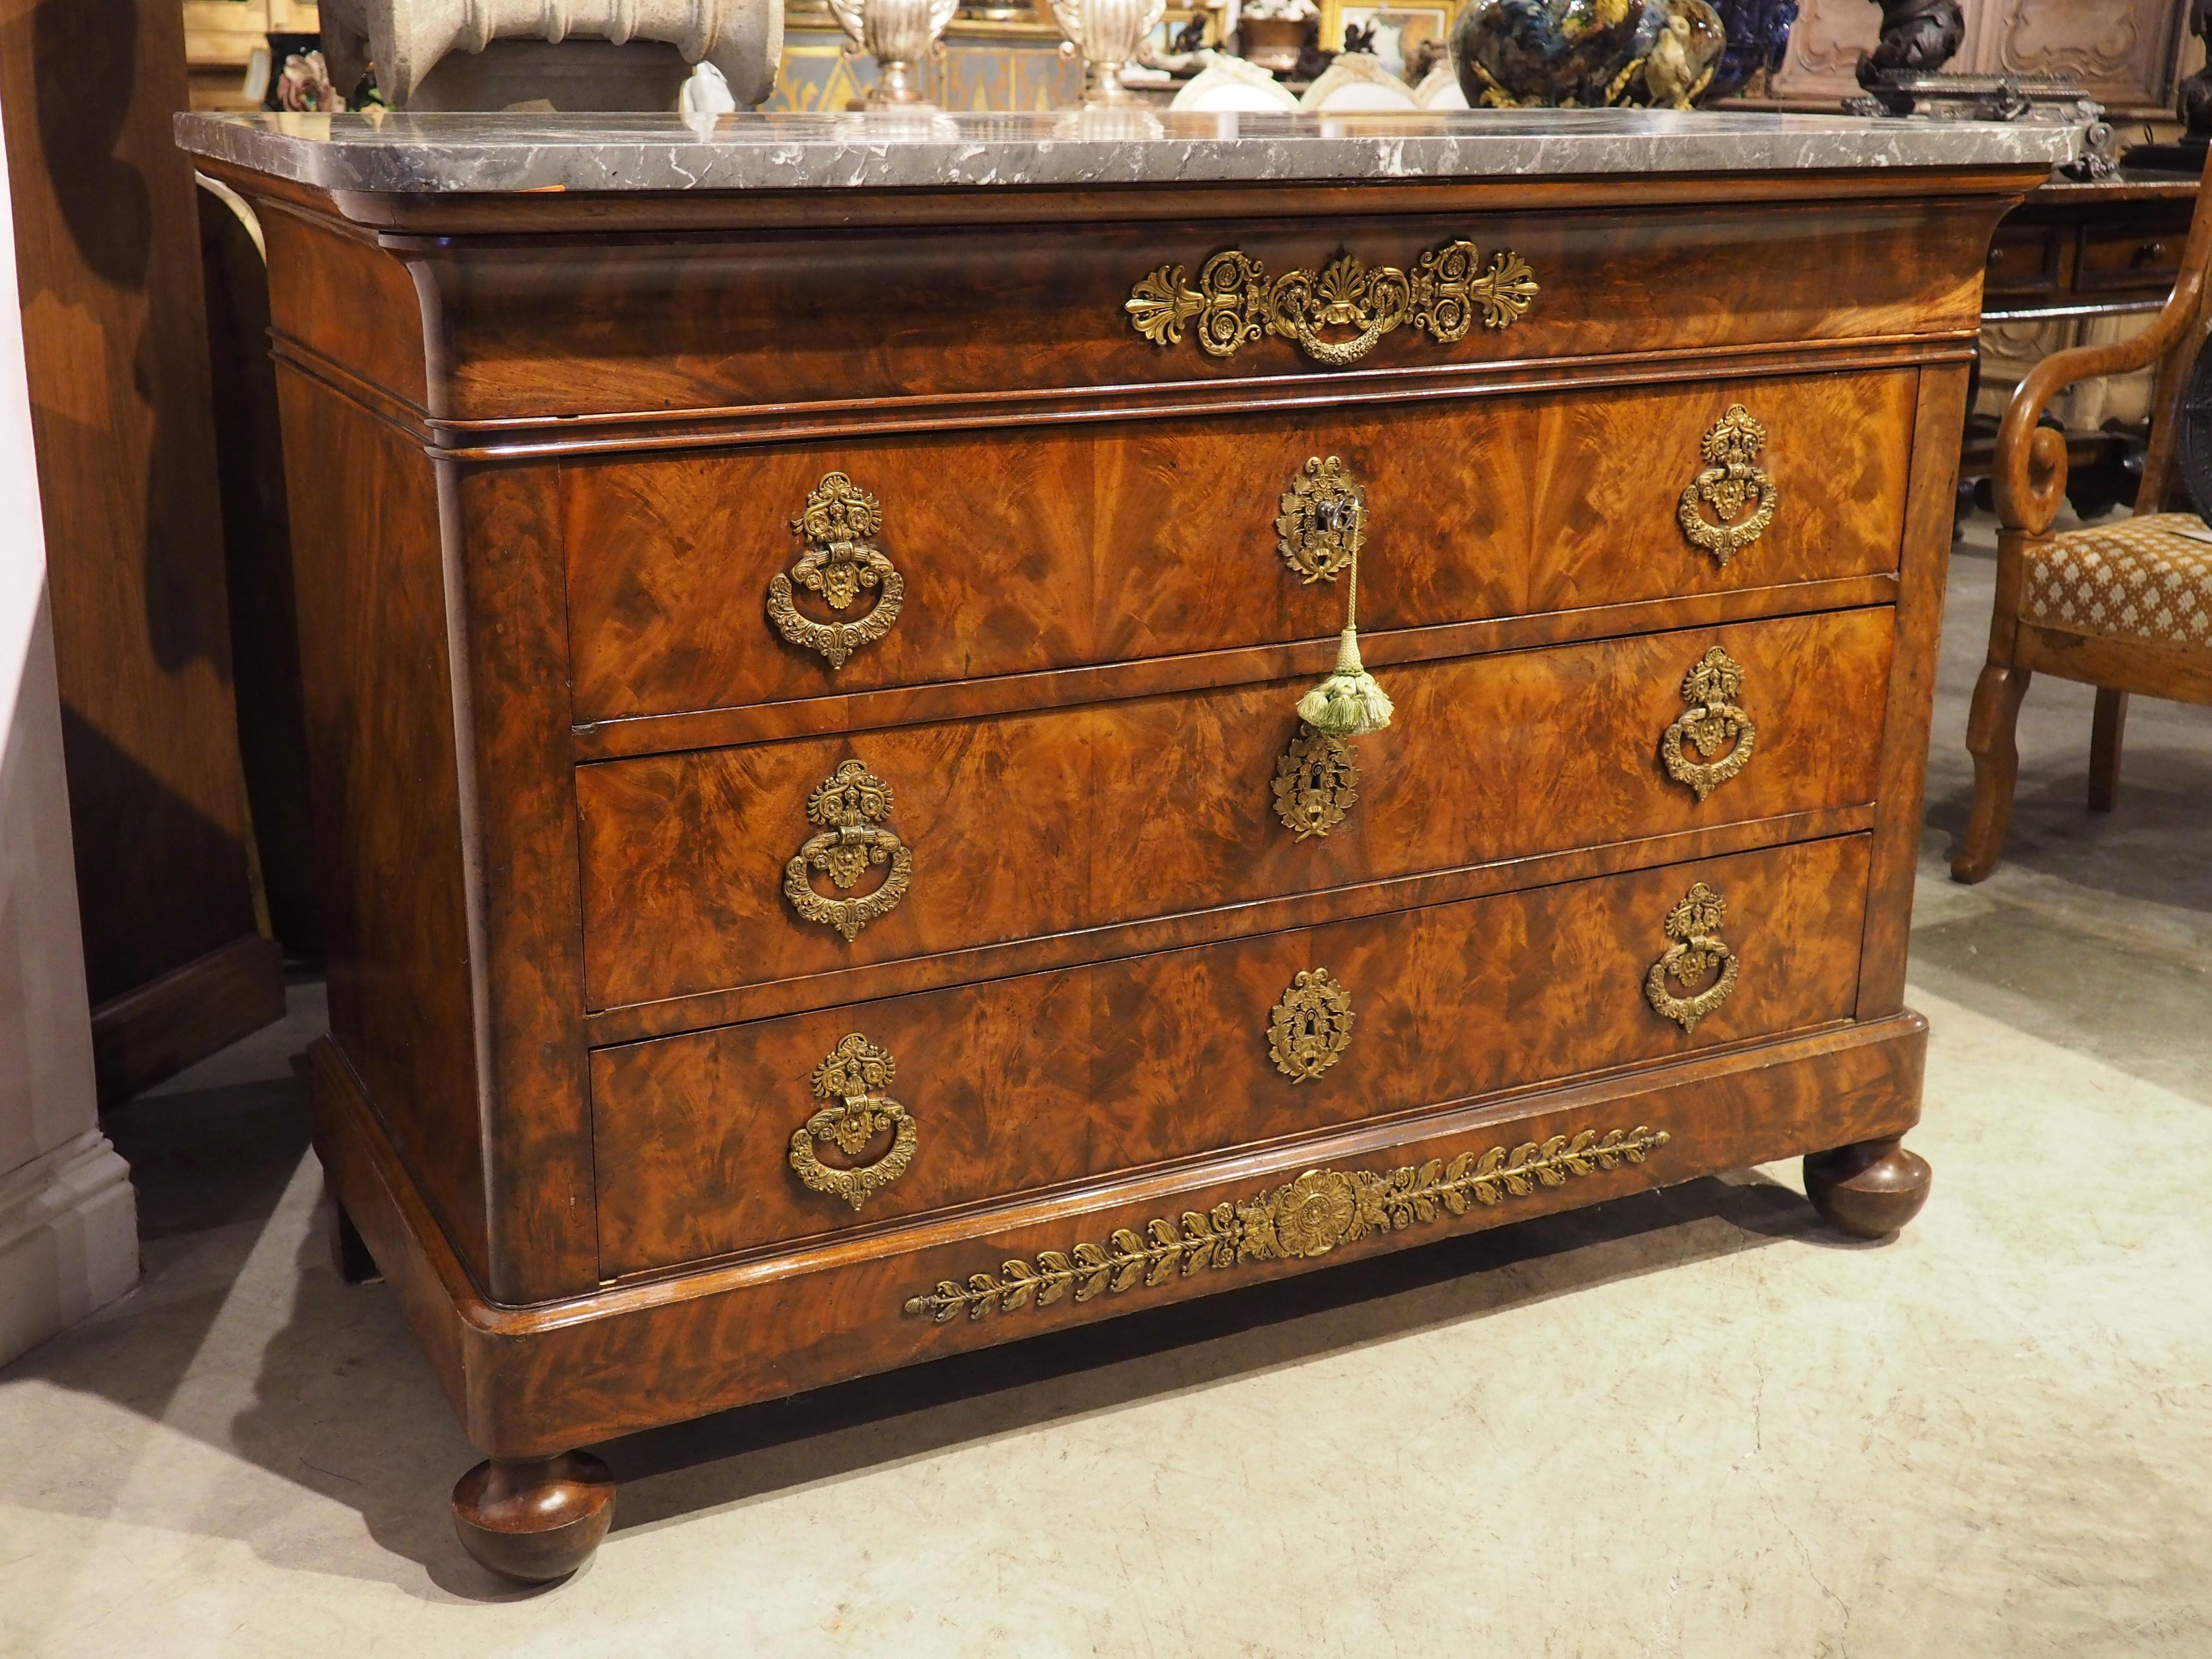 Metal Circa 1820 French Restauration Commode in Flame Mahogany, Gilt Bronze Hardware For Sale